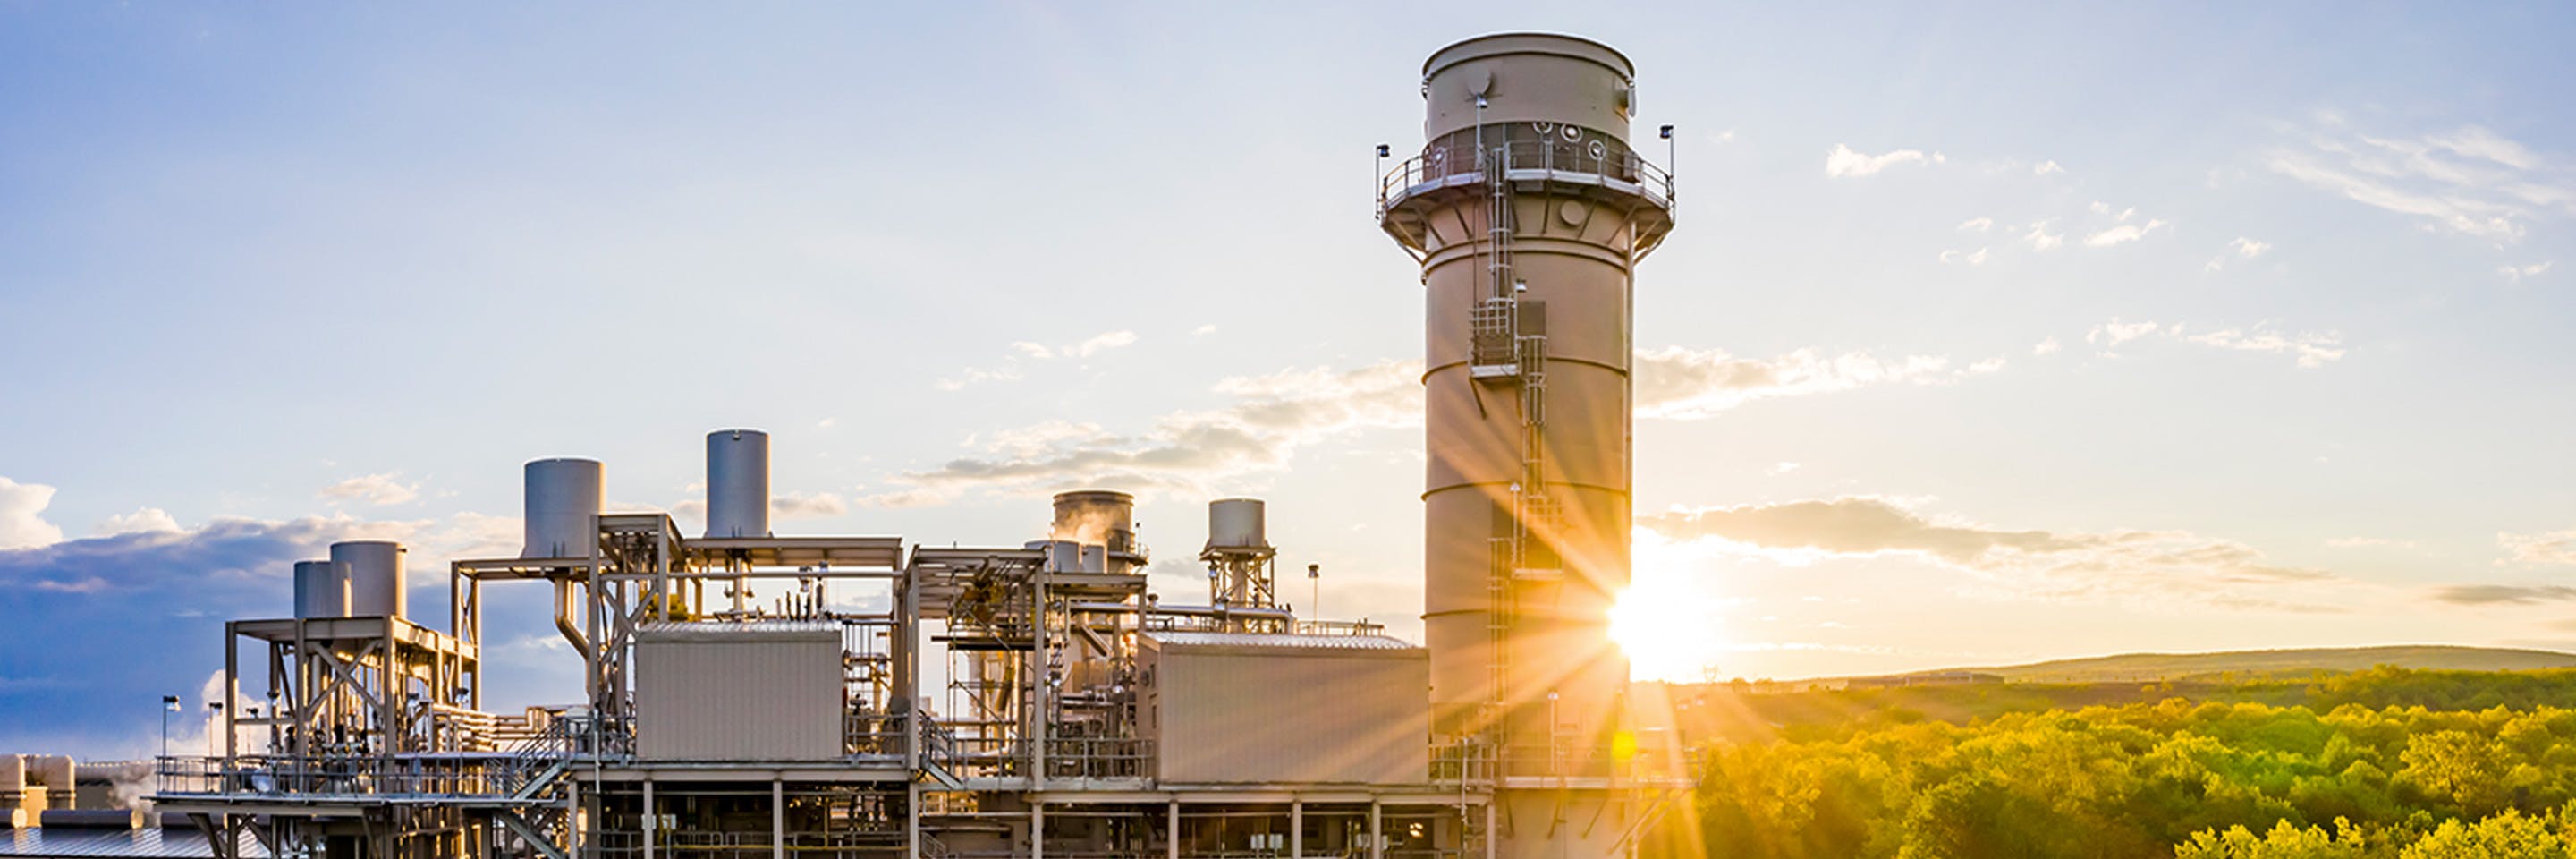 This natural gas combined-cycle electric generation facility represents an important step in the clean energy transition.